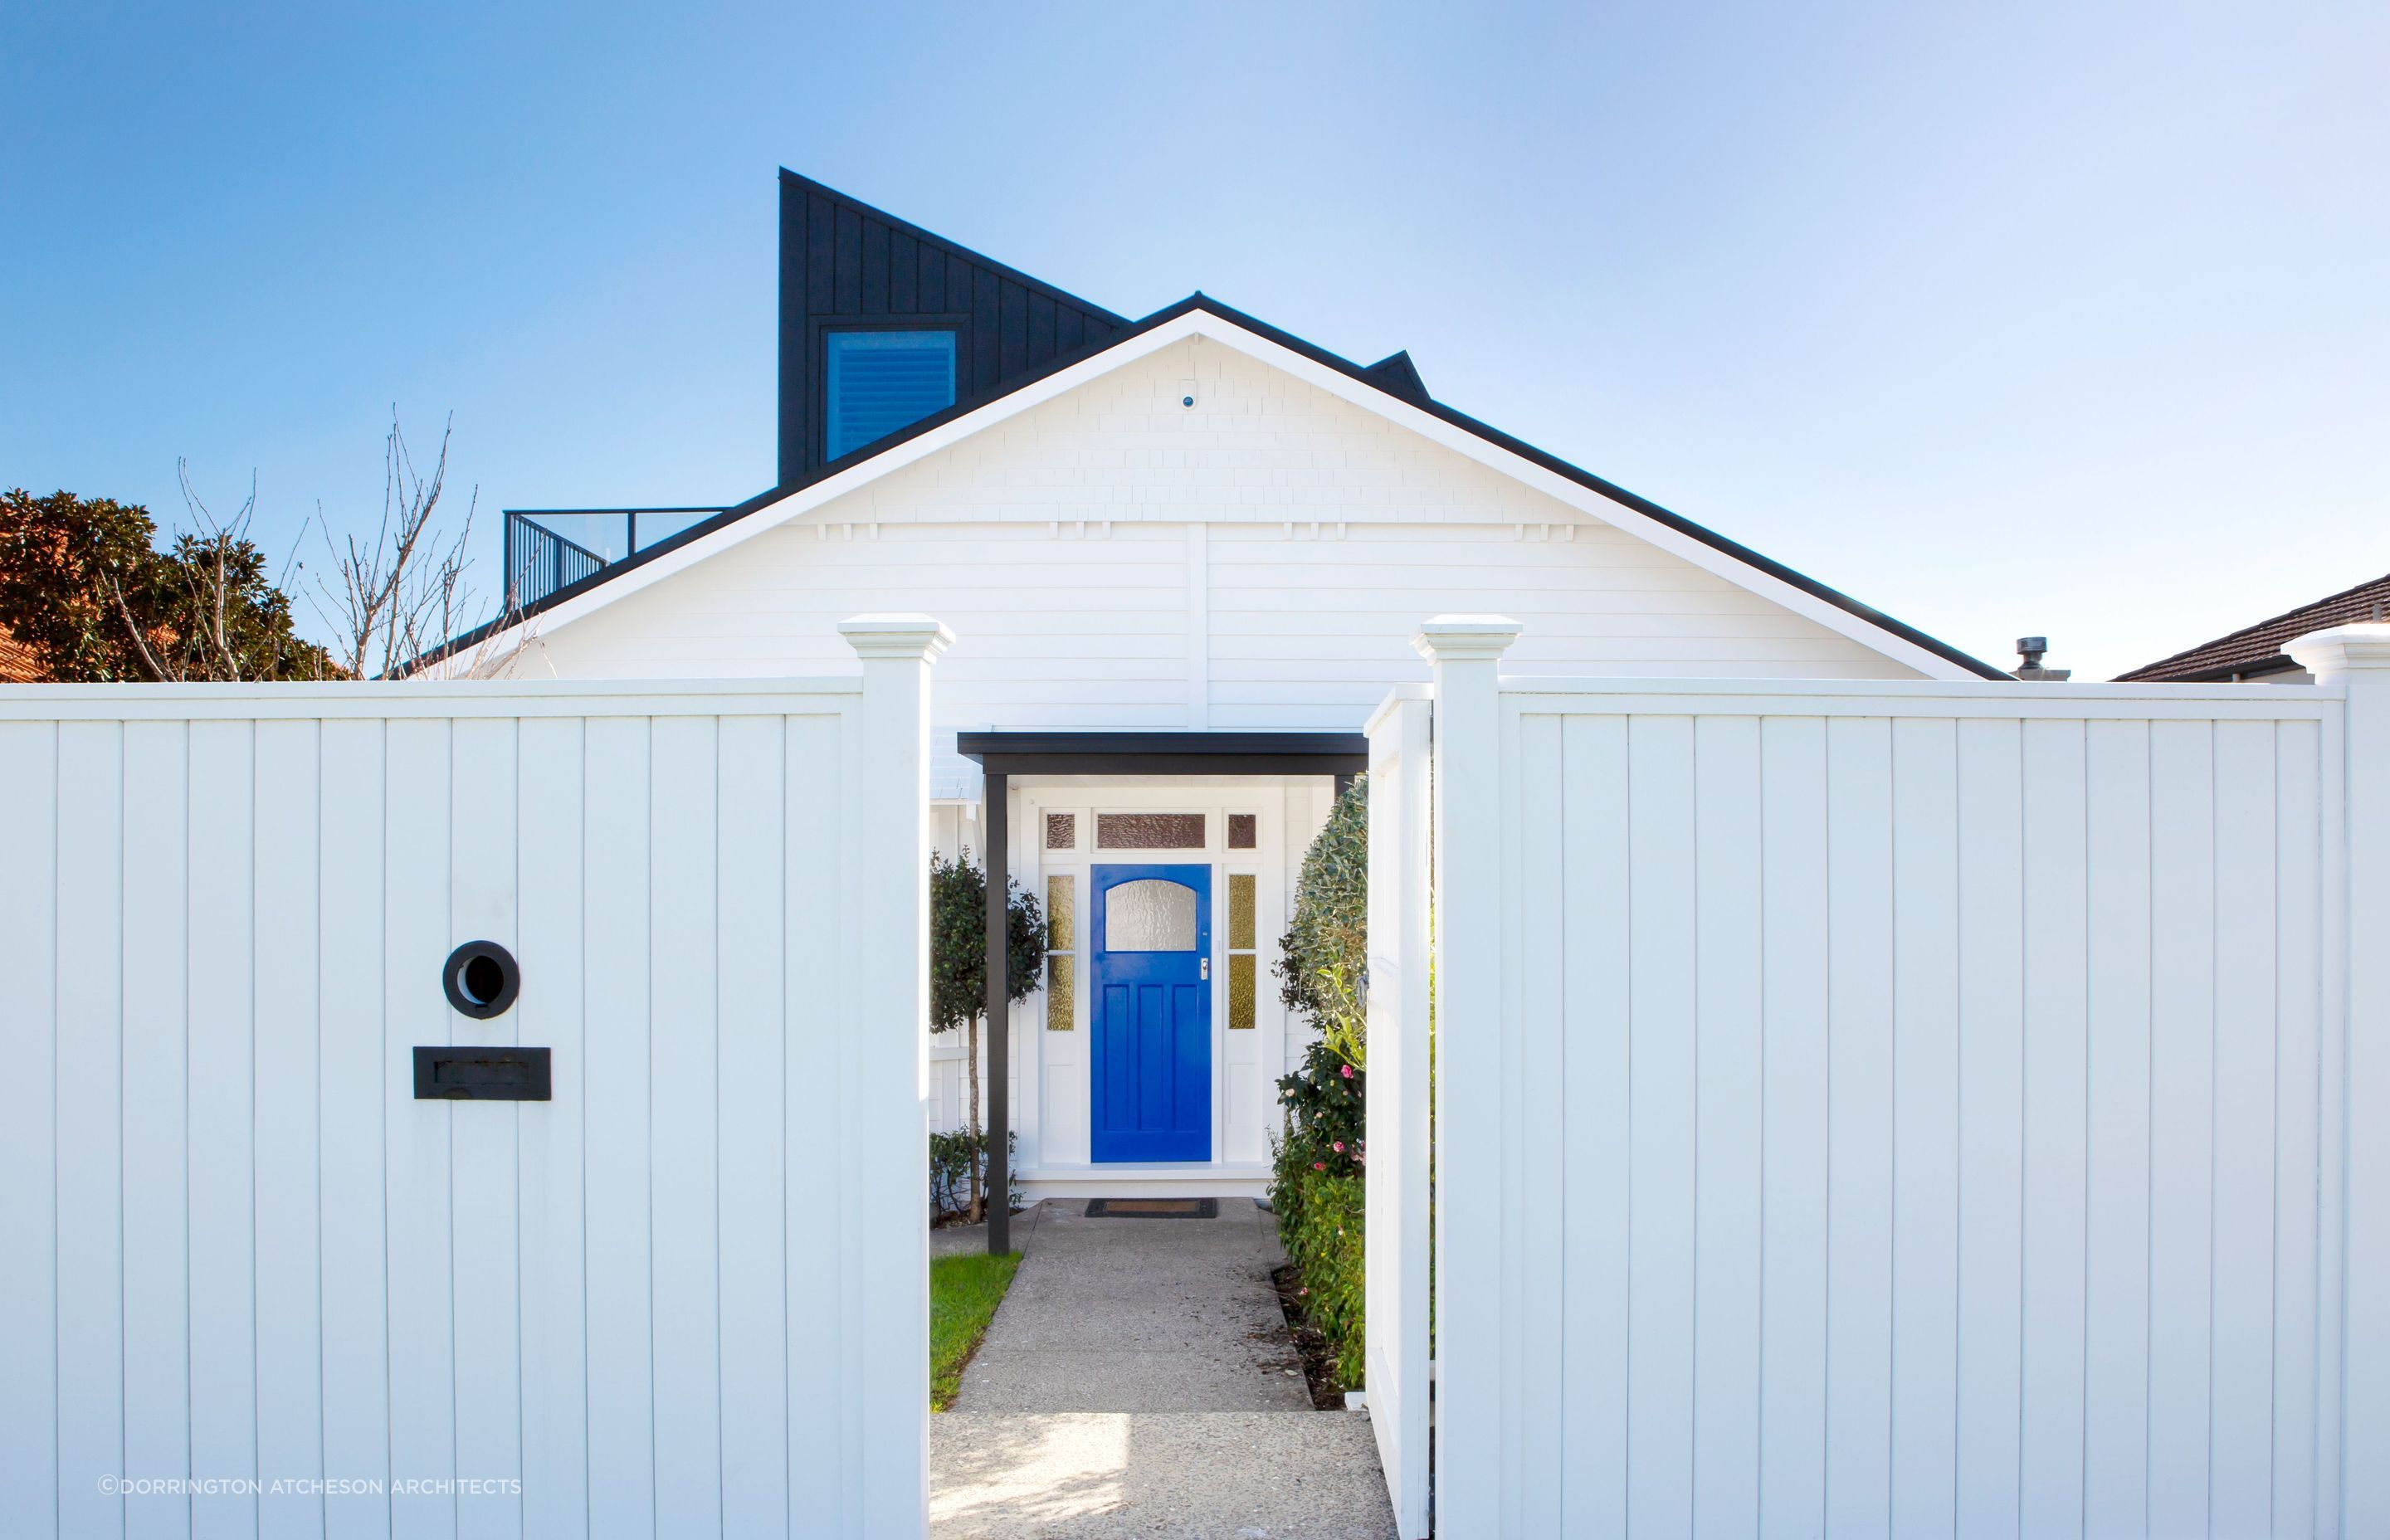 The impact pop of blue with the front door of this lovely family home in Bayswater